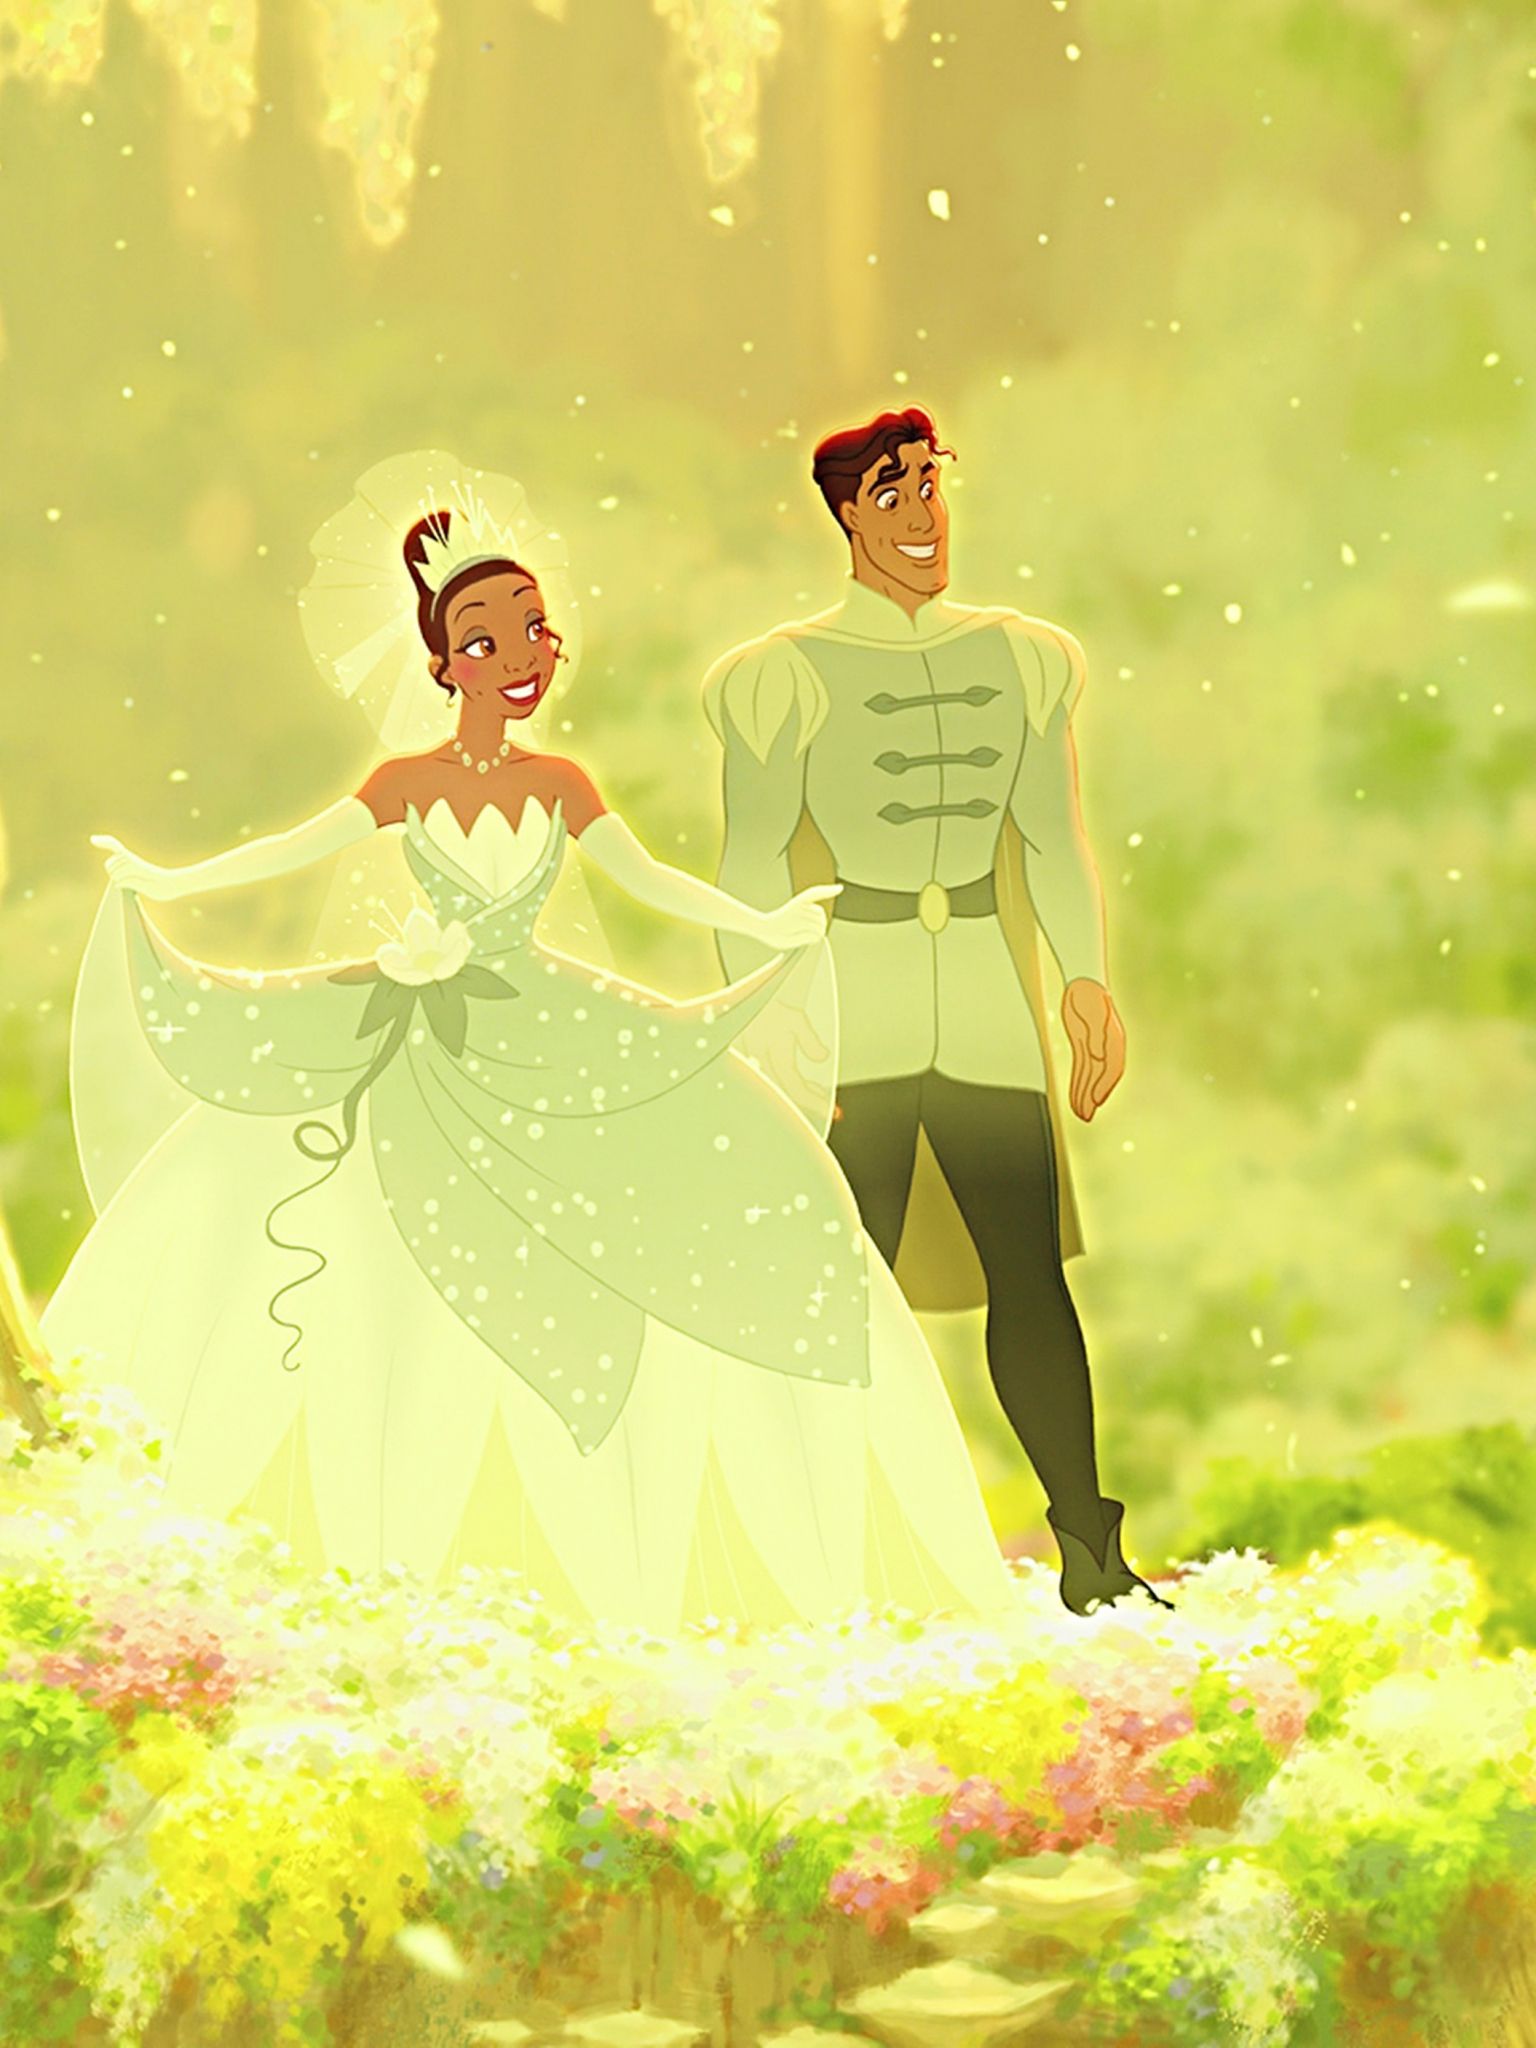 Free download Princess Tiana Image Crazy Gallery [5000x2813] for your Desktop, Mobile & Tablet. Explore Princess Tiana Wallpaper. Princess and the Frog Wallpaper